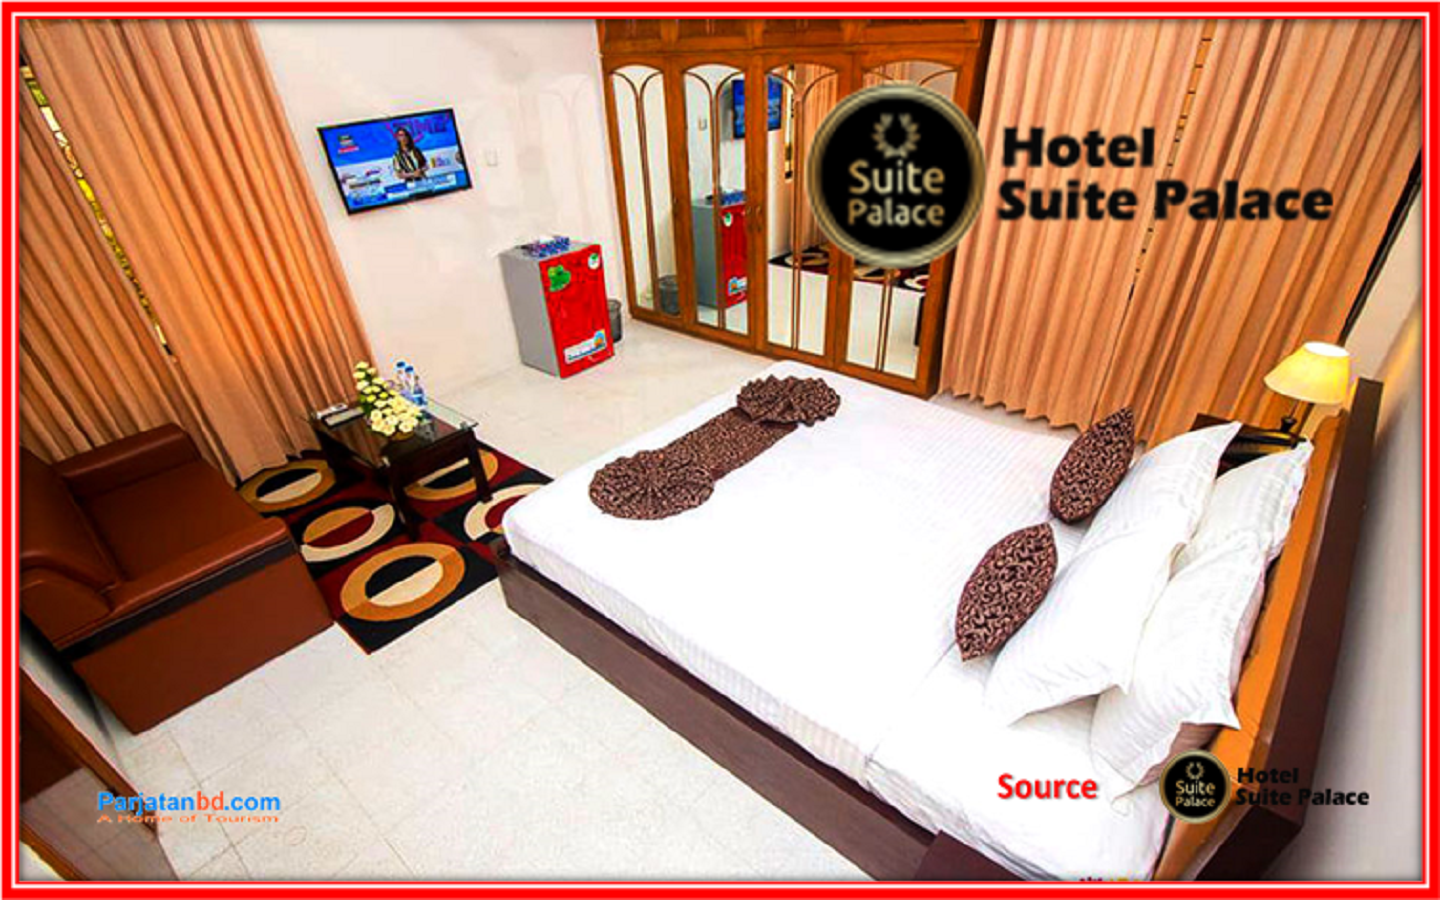 Room Executive Suite -1, Hotel Suite Palace, Baridhara